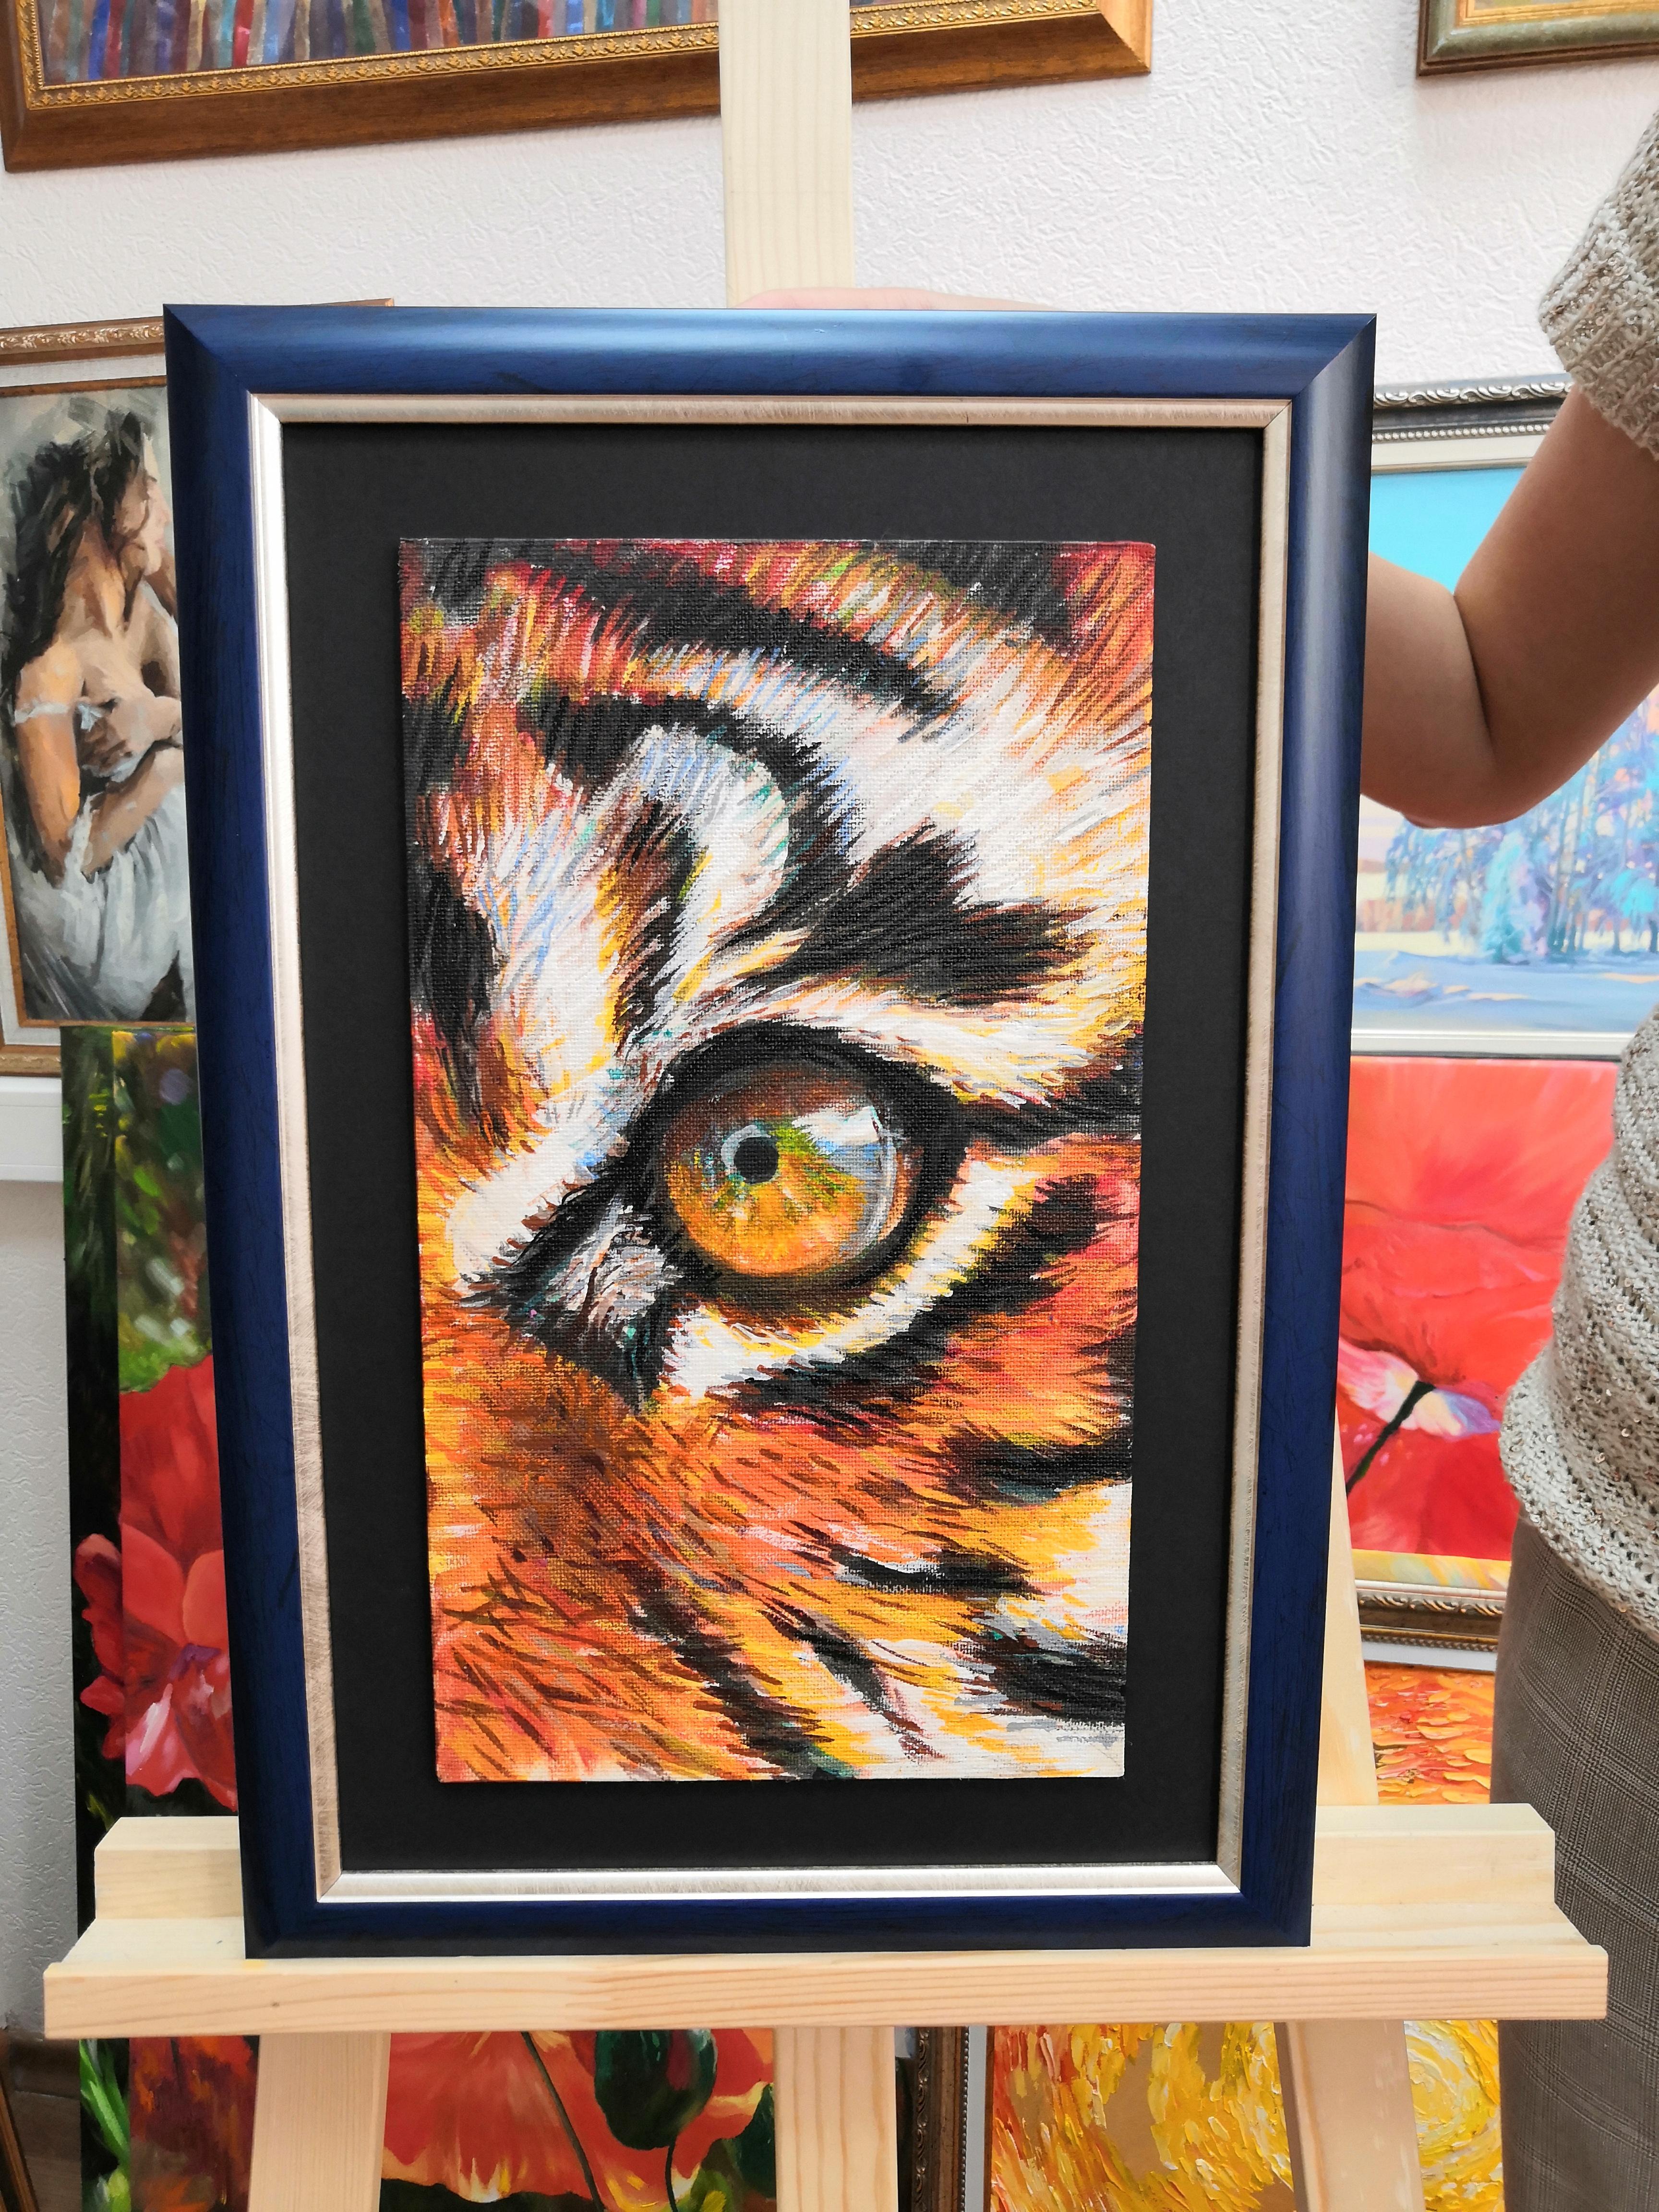 The paintings are drawn with acrylic on the hardboard (back side made of the double cardboard).

Acrylic paints are used to create the painting on canvas animals and ecology. A crucial objective for all of humanity. Birds, reptiles, and rare species